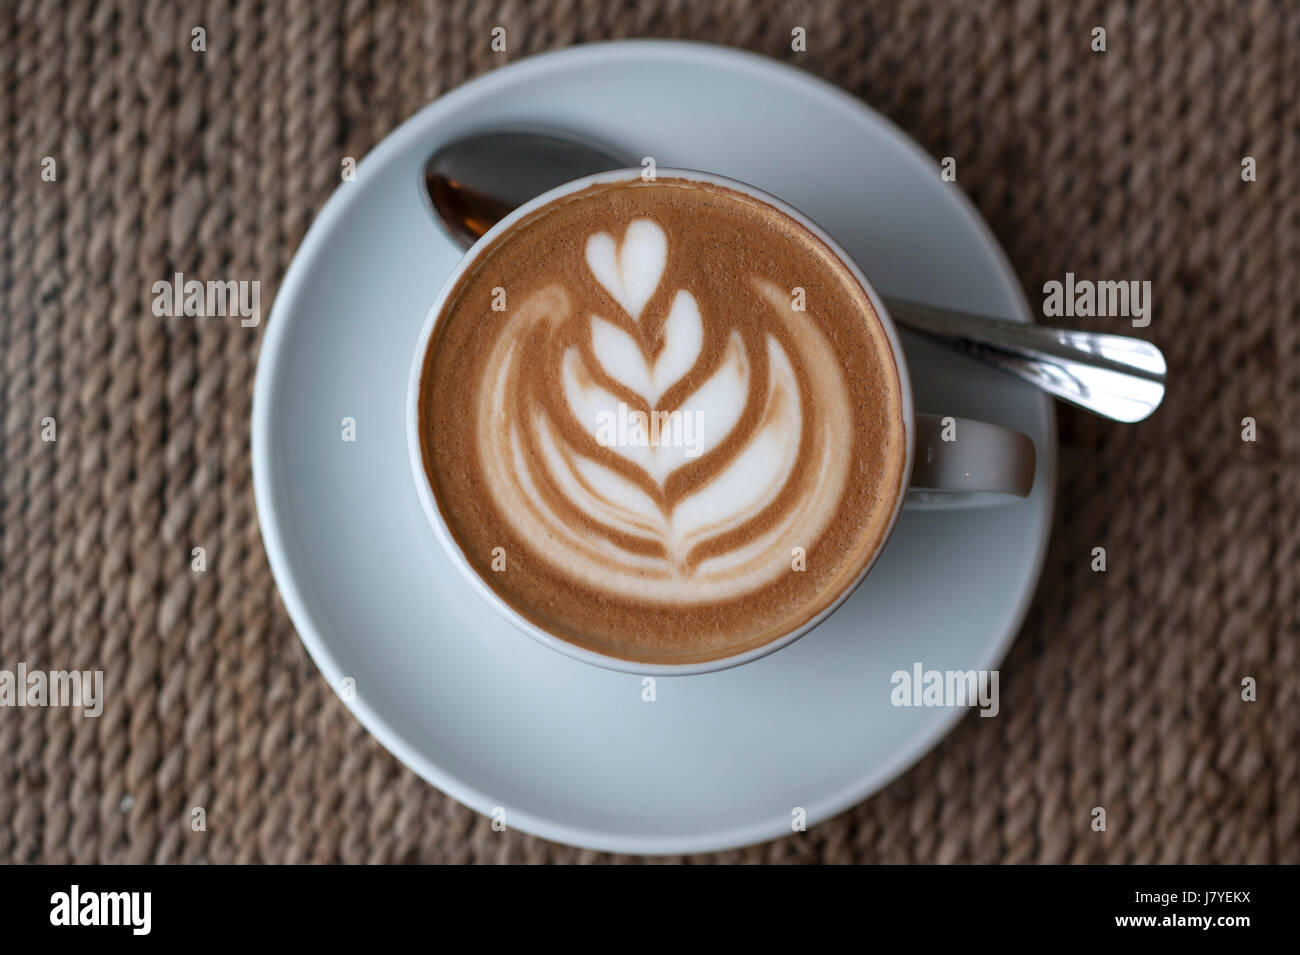 Cappuccino with decorated milk froth Stock Photo